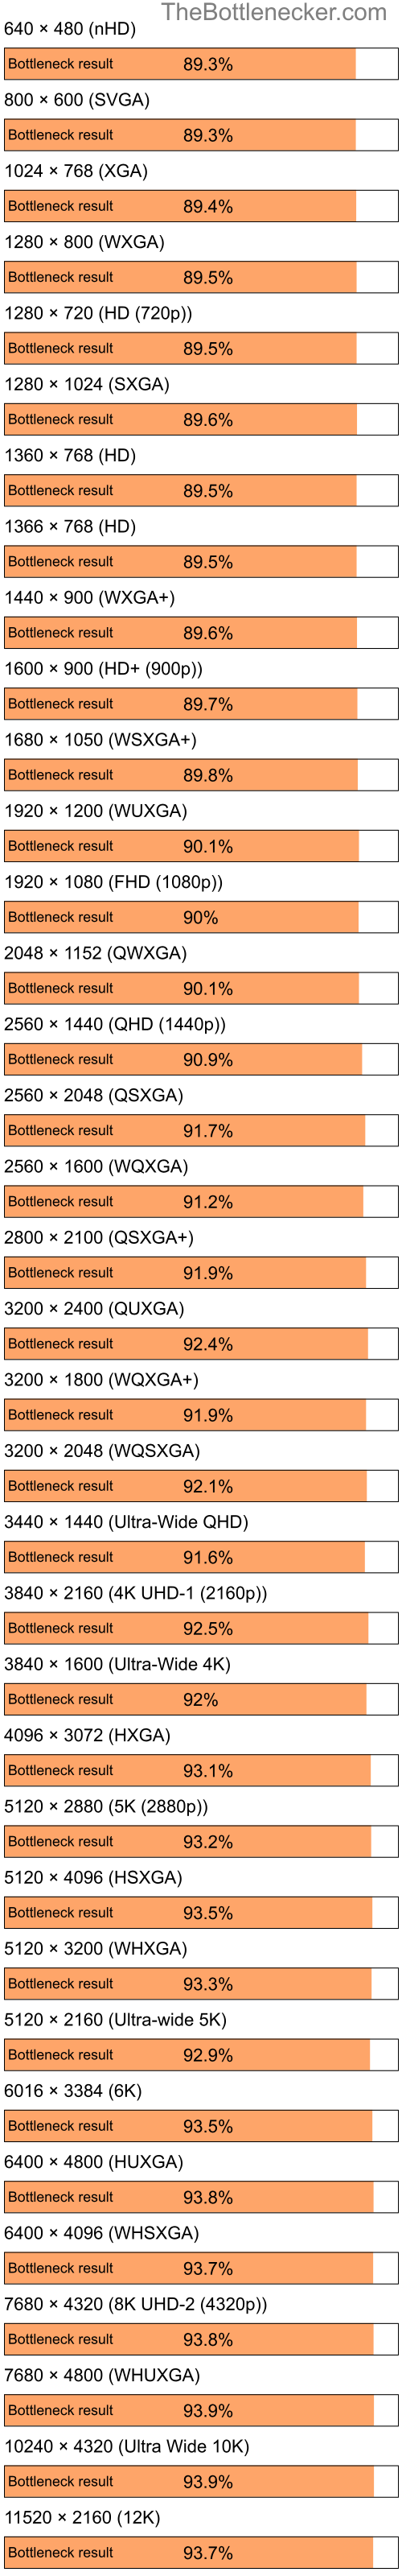 Bottleneck results by resolution for Intel Pentium 4 and NVIDIA MX 400 in General Tasks